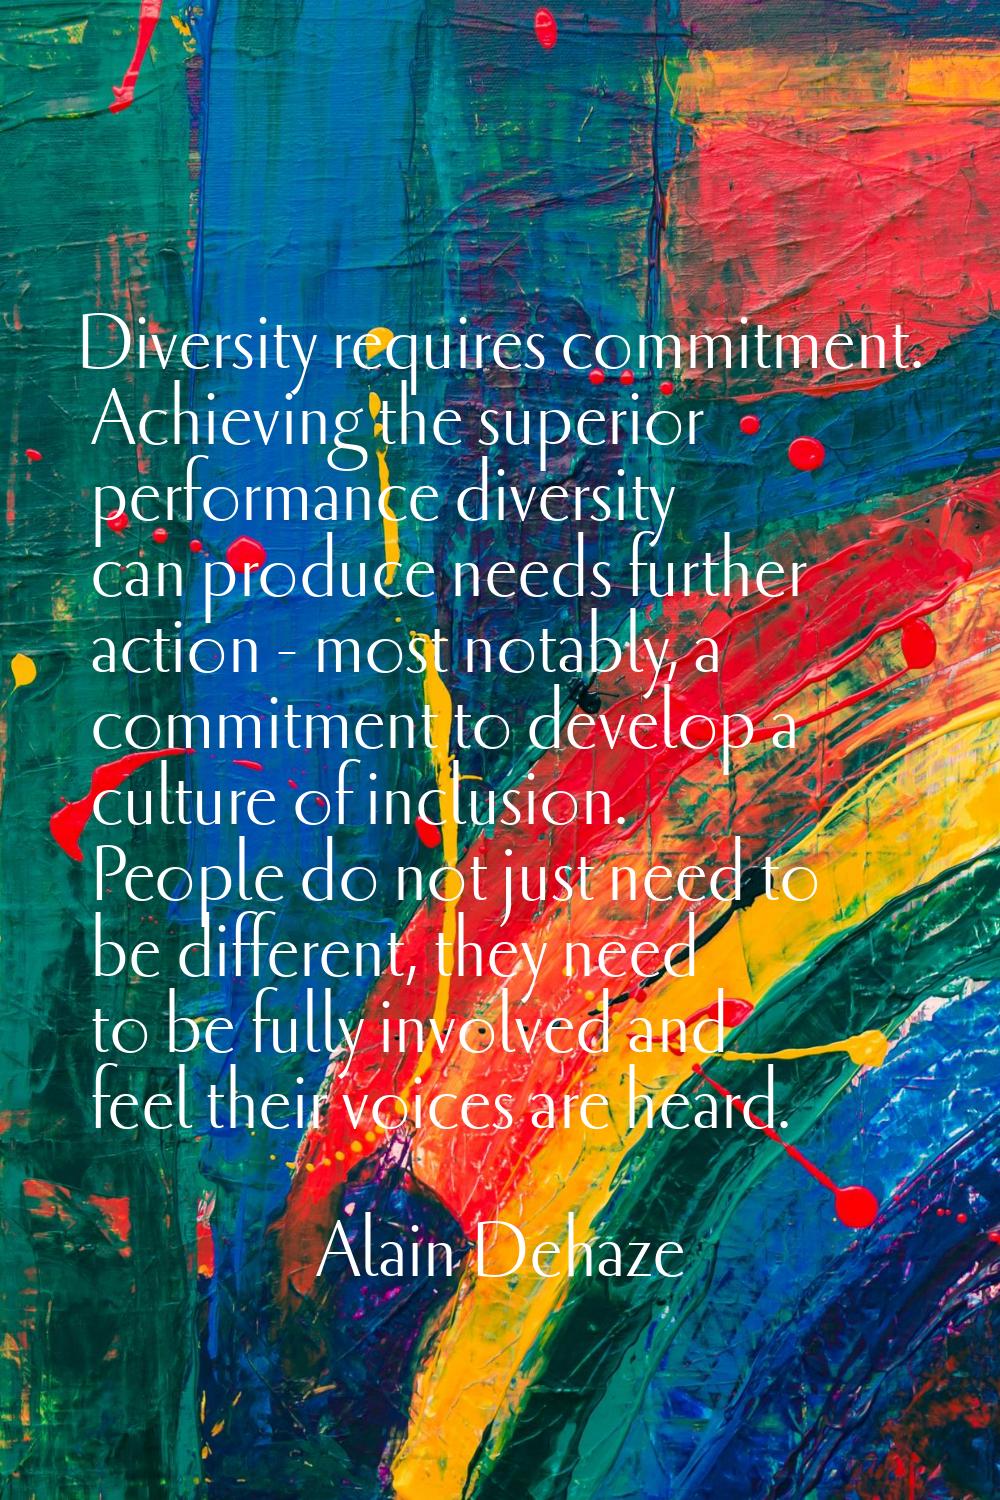 Diversity requires commitment. Achieving the superior performance diversity can produce needs furth